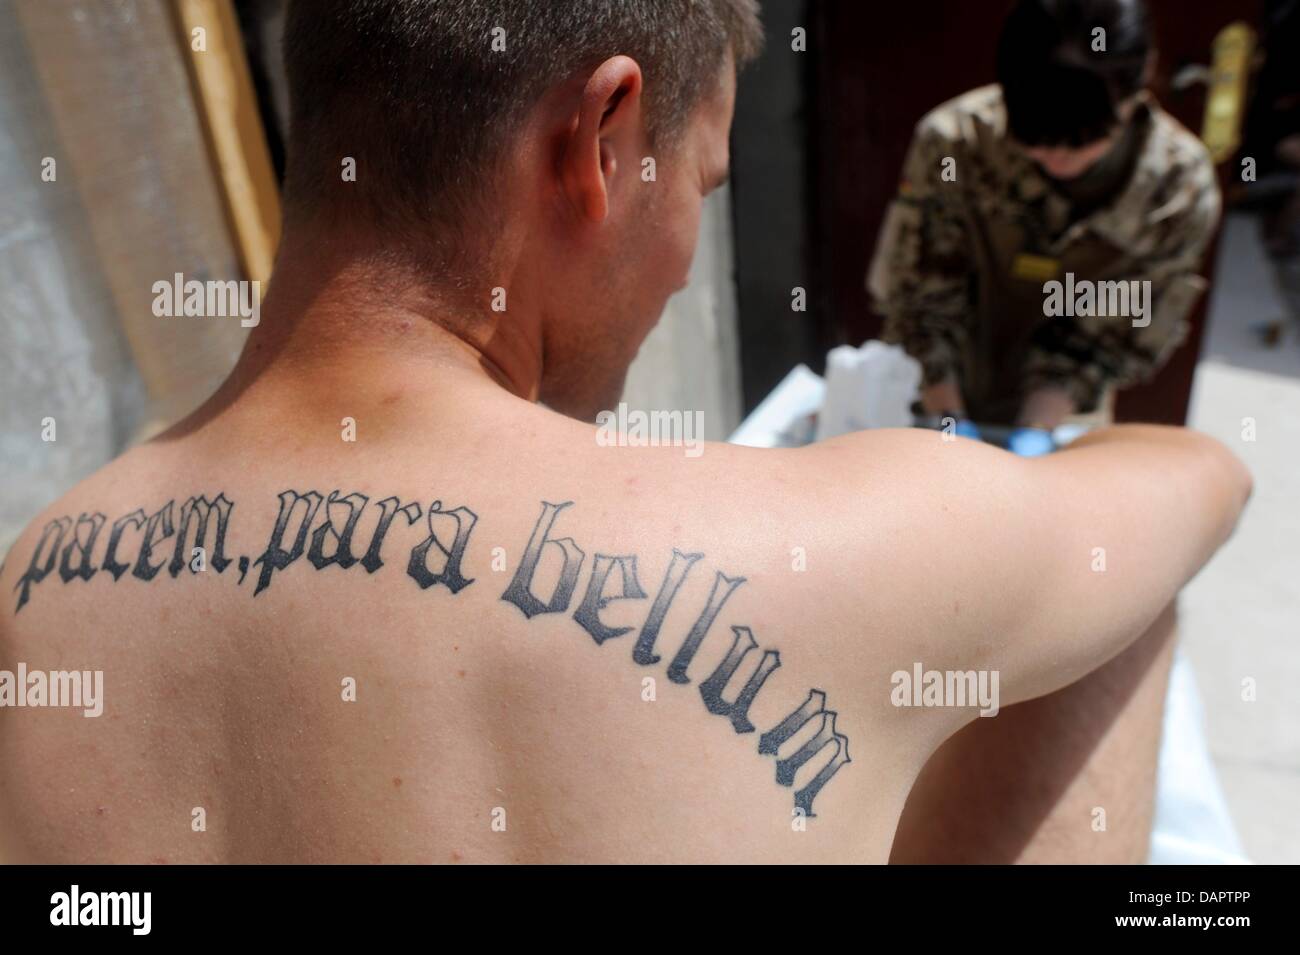 Si vis pacem, para bellum.' ('If you wish for peace, prepare for war') is  tattooed on the back of a German soldier, who is preparing for a mission in  the headquarters in